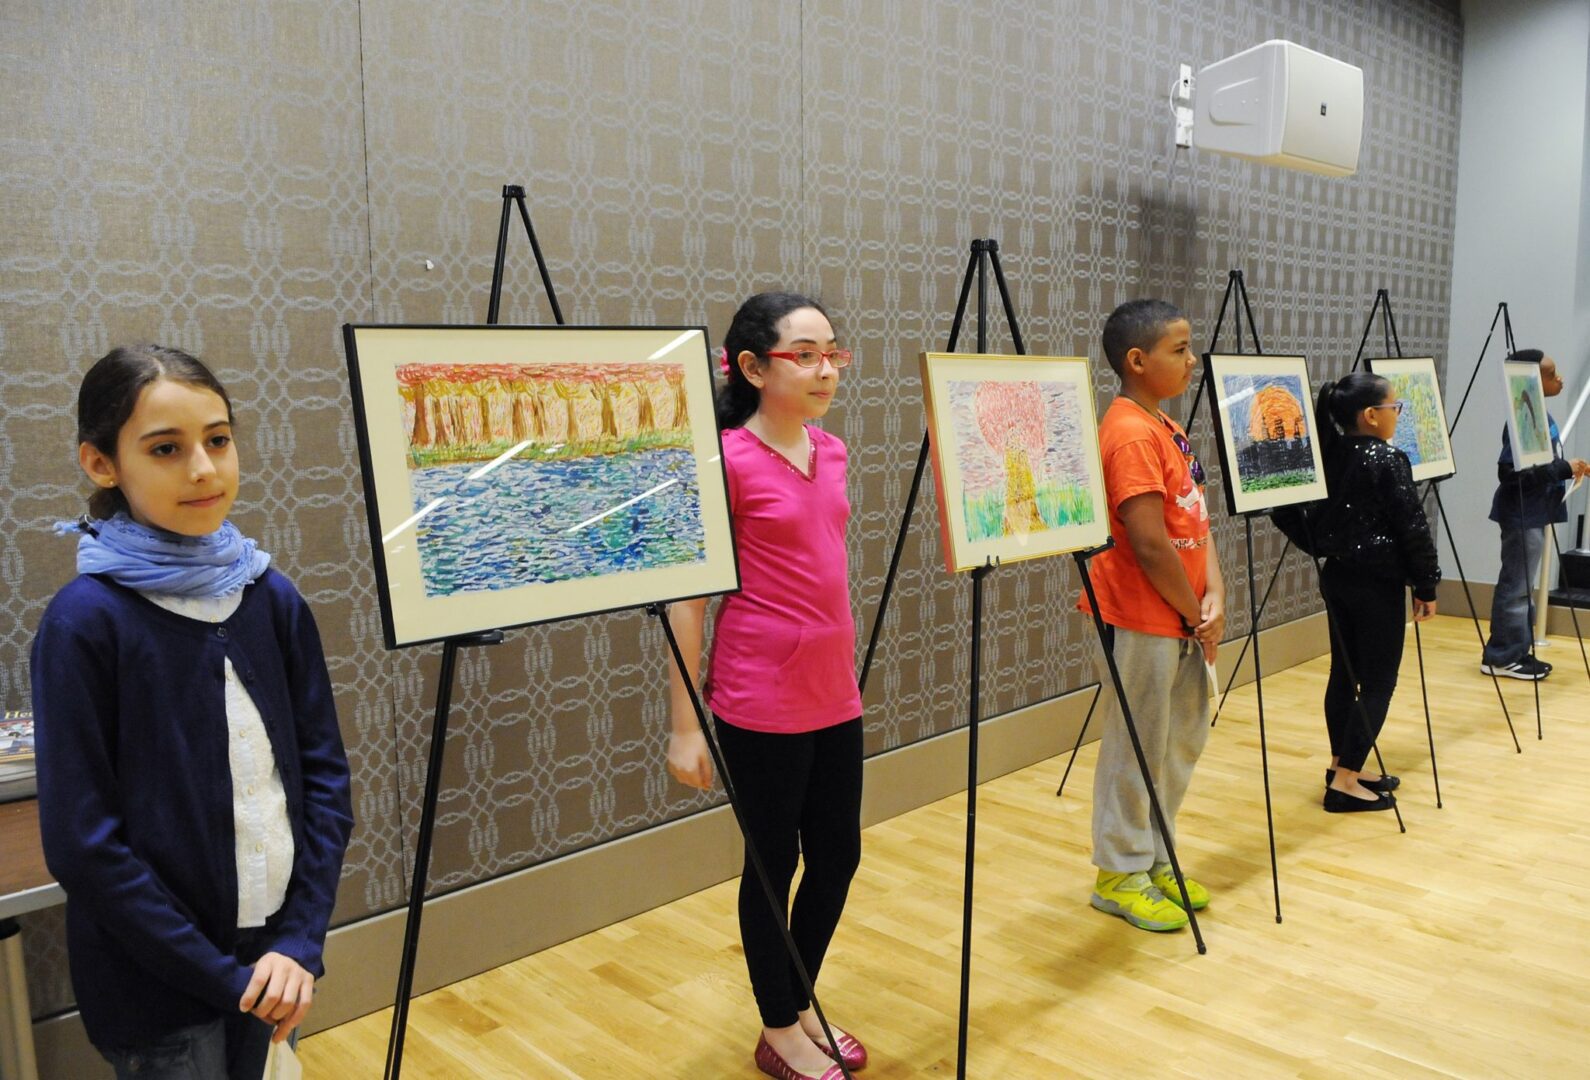 A group of children standing in front of paintings.